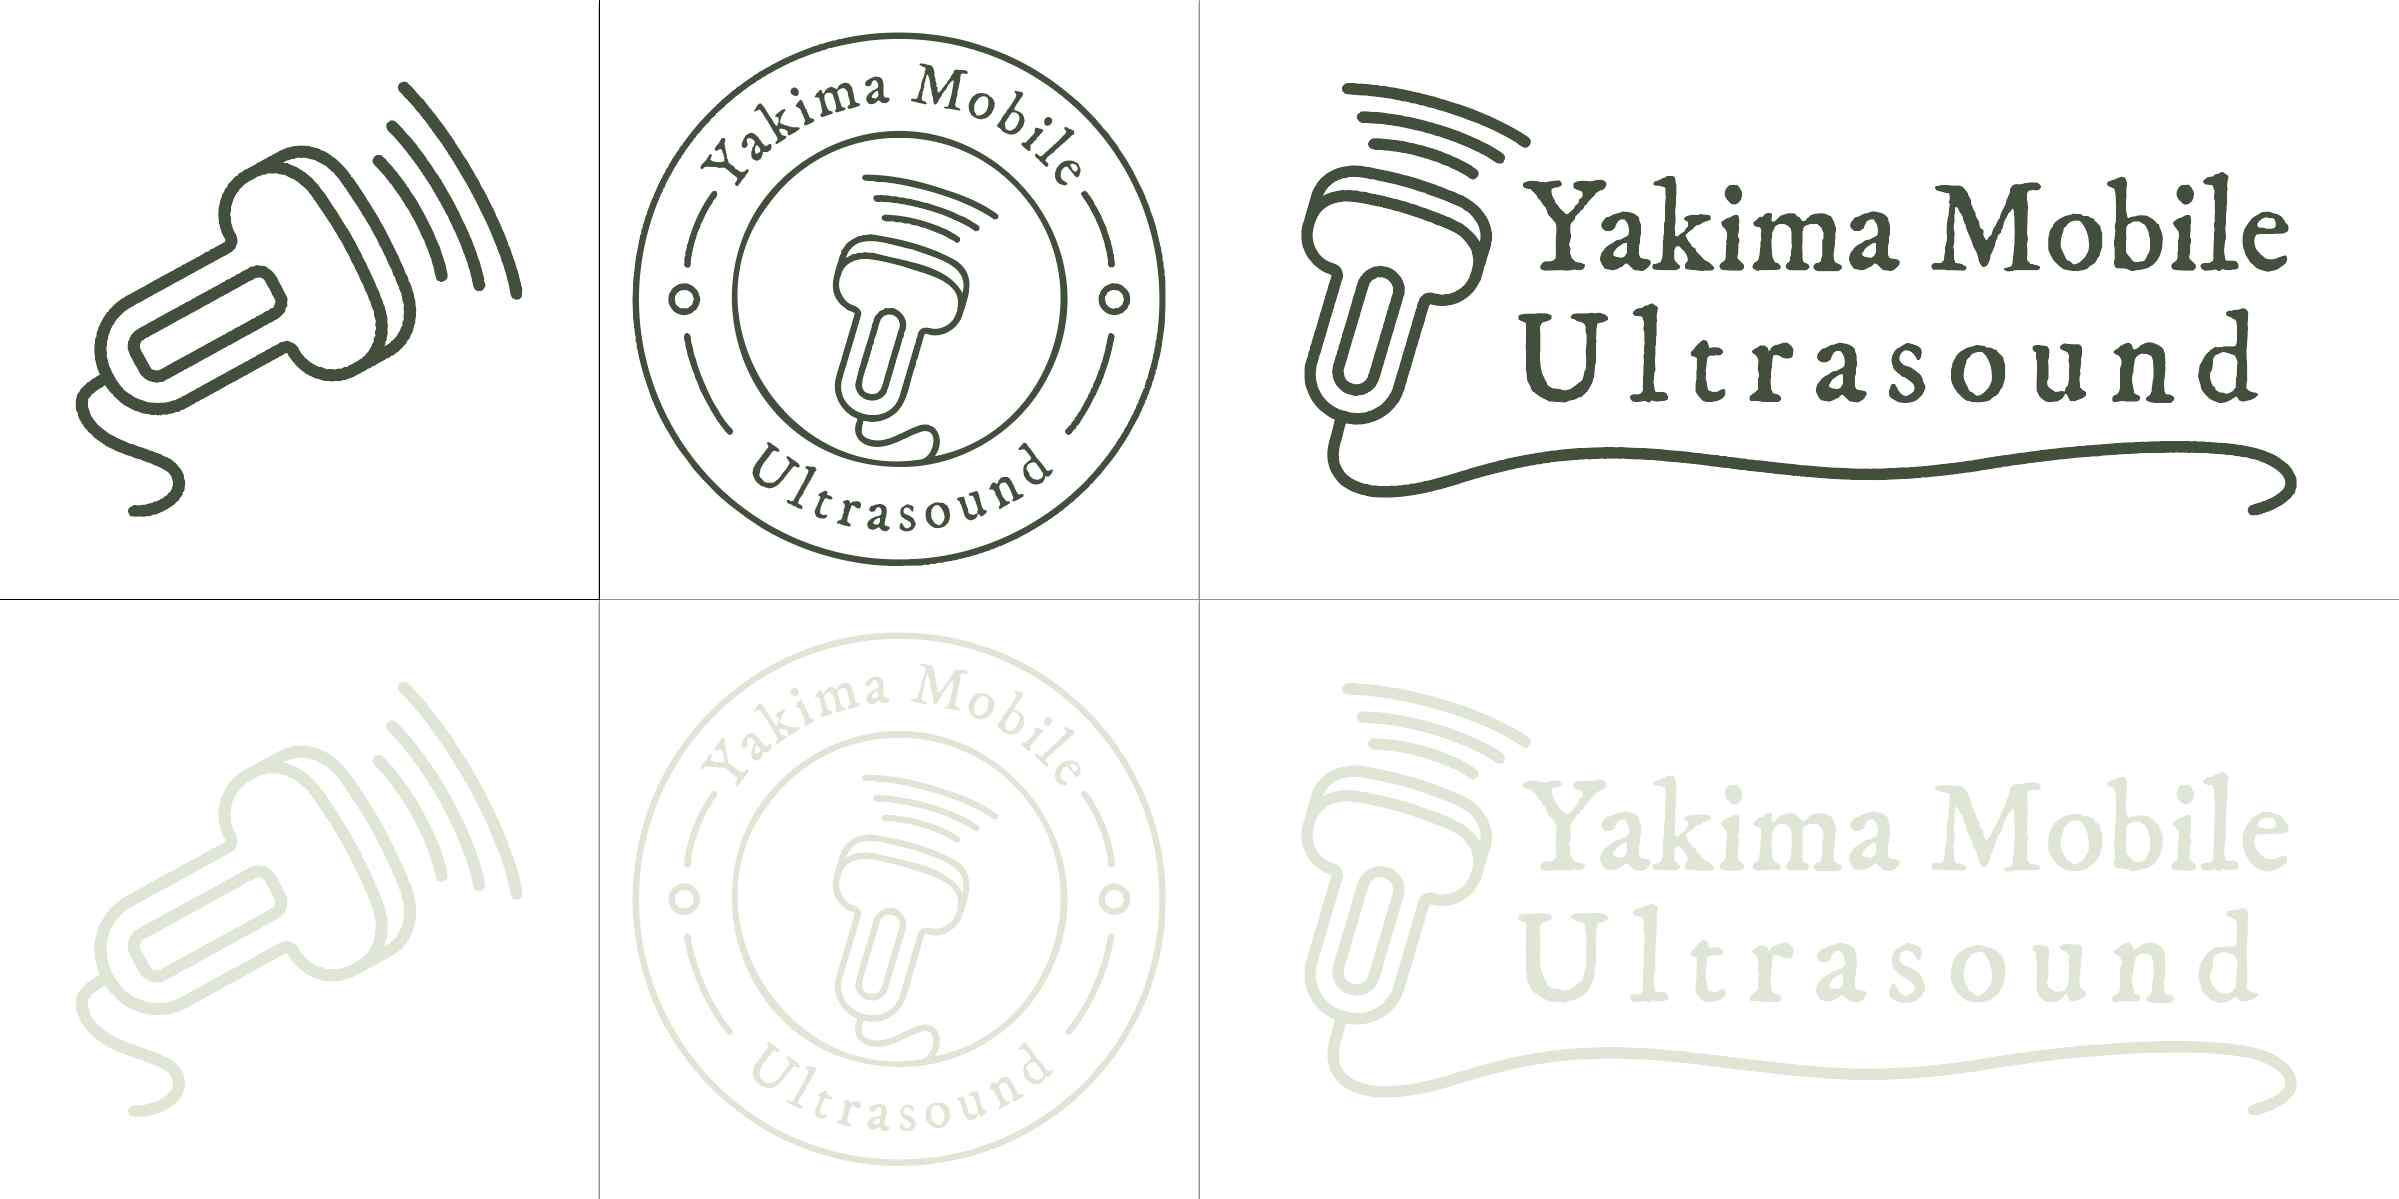 Yakima Mobile Ultrasound's logo, logo seal, and logotype in the brand's dark and light green colors